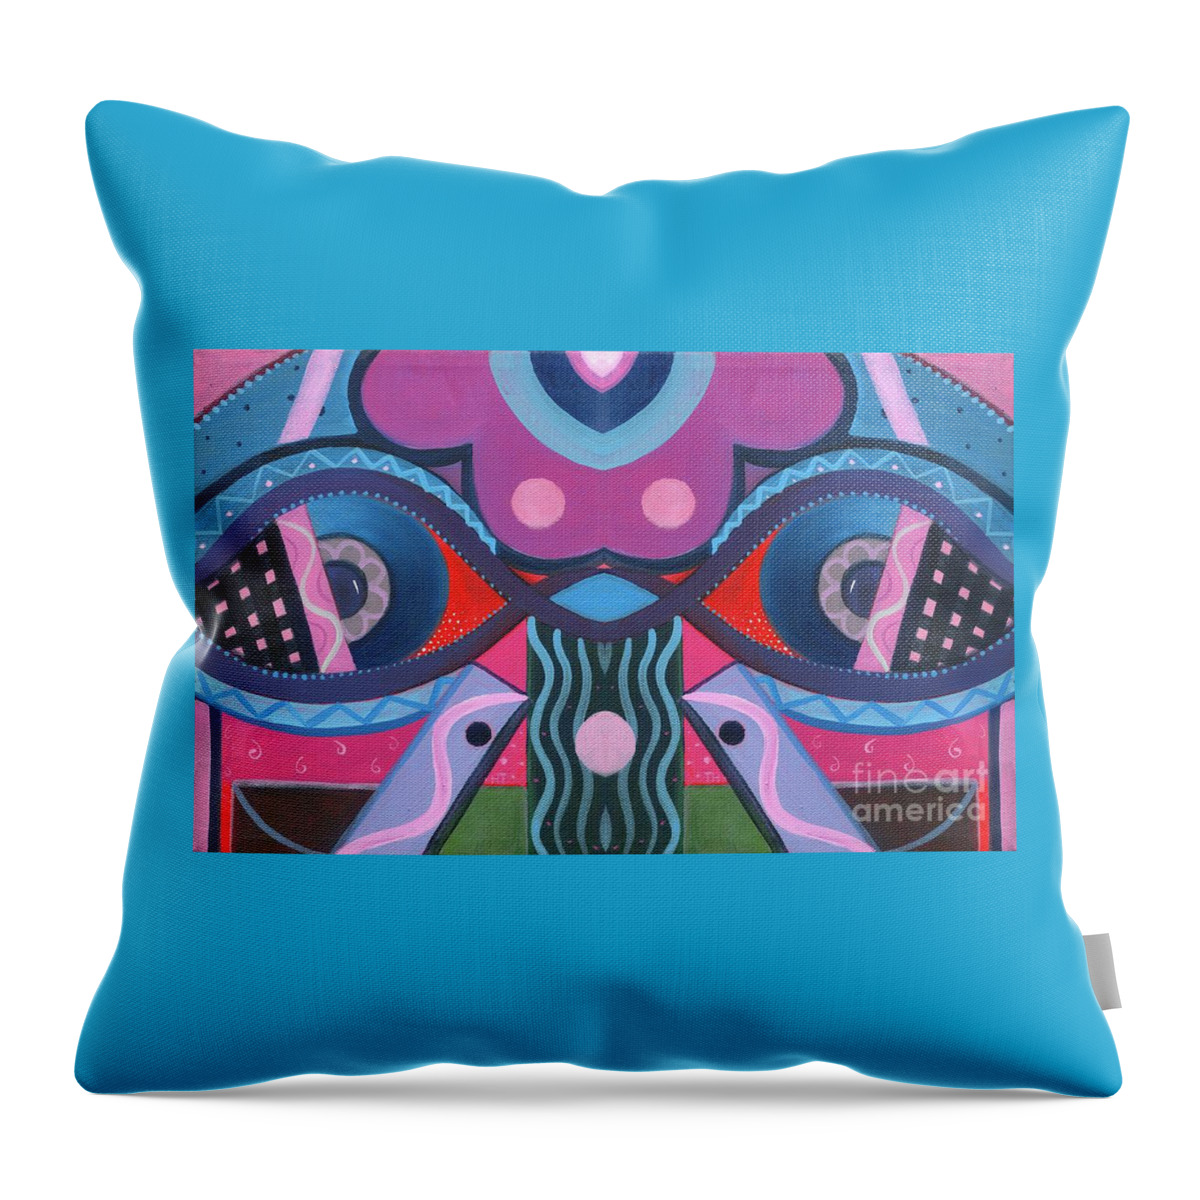 Seeing Throw Pillow featuring the digital art Forever Witness 2 by Helena Tiainen